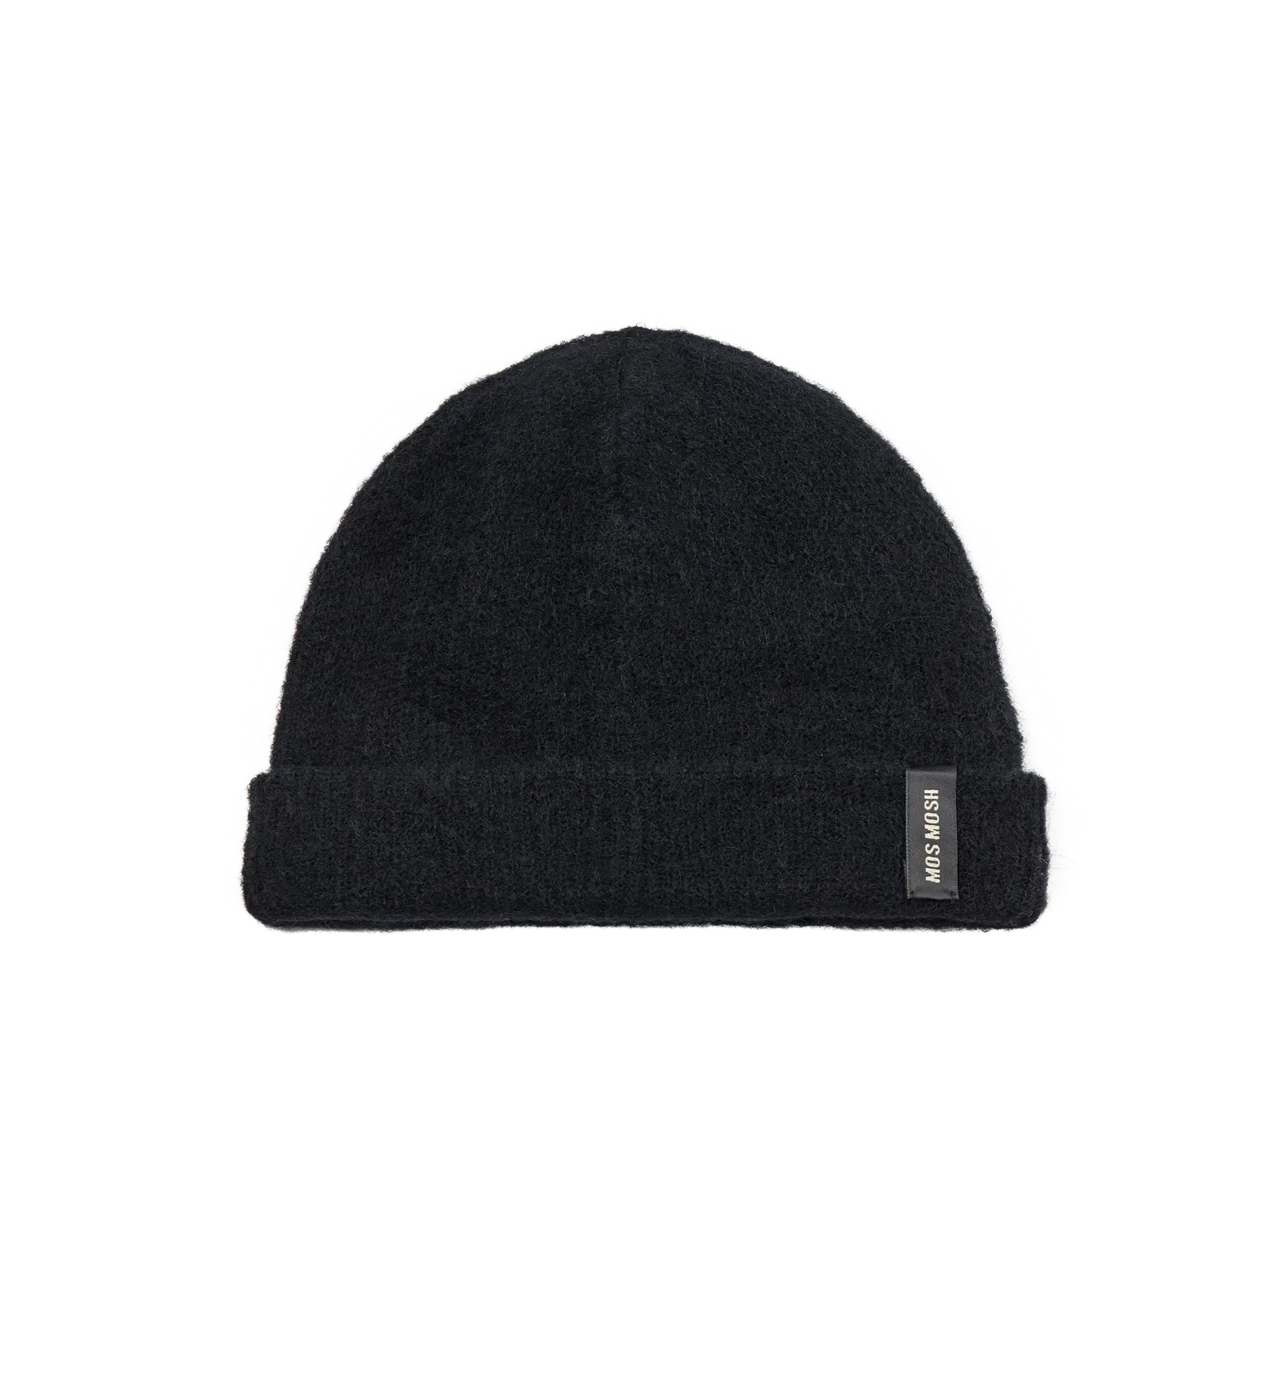 Black ribbed woolly hat